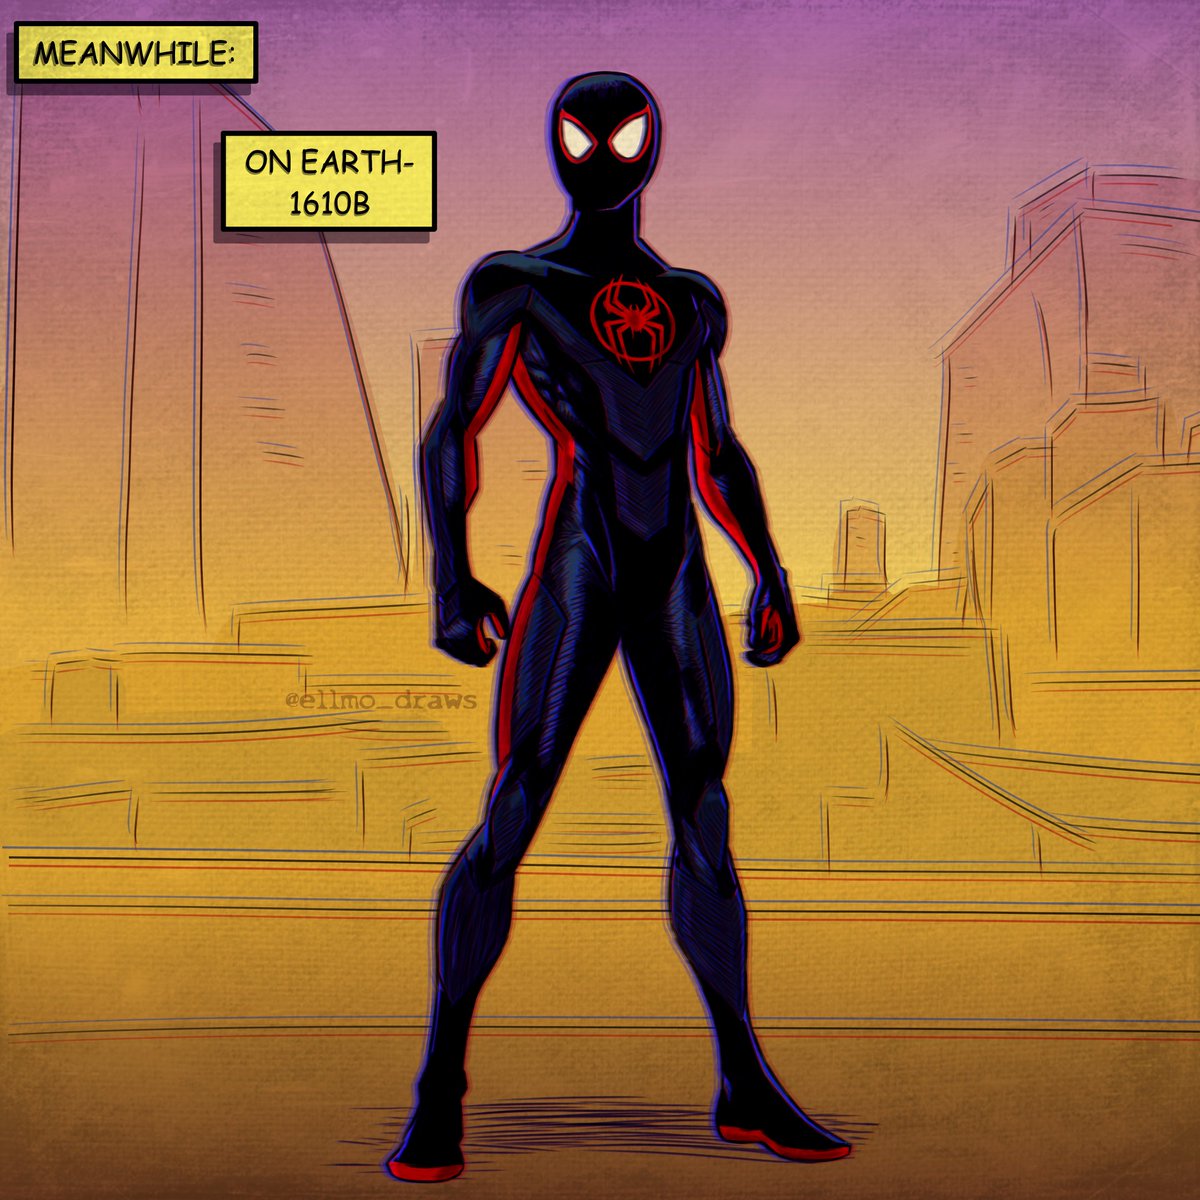 His name is Miles Morales. He was bitten by a radioactive spider, and he's not the only one... #Spiderman